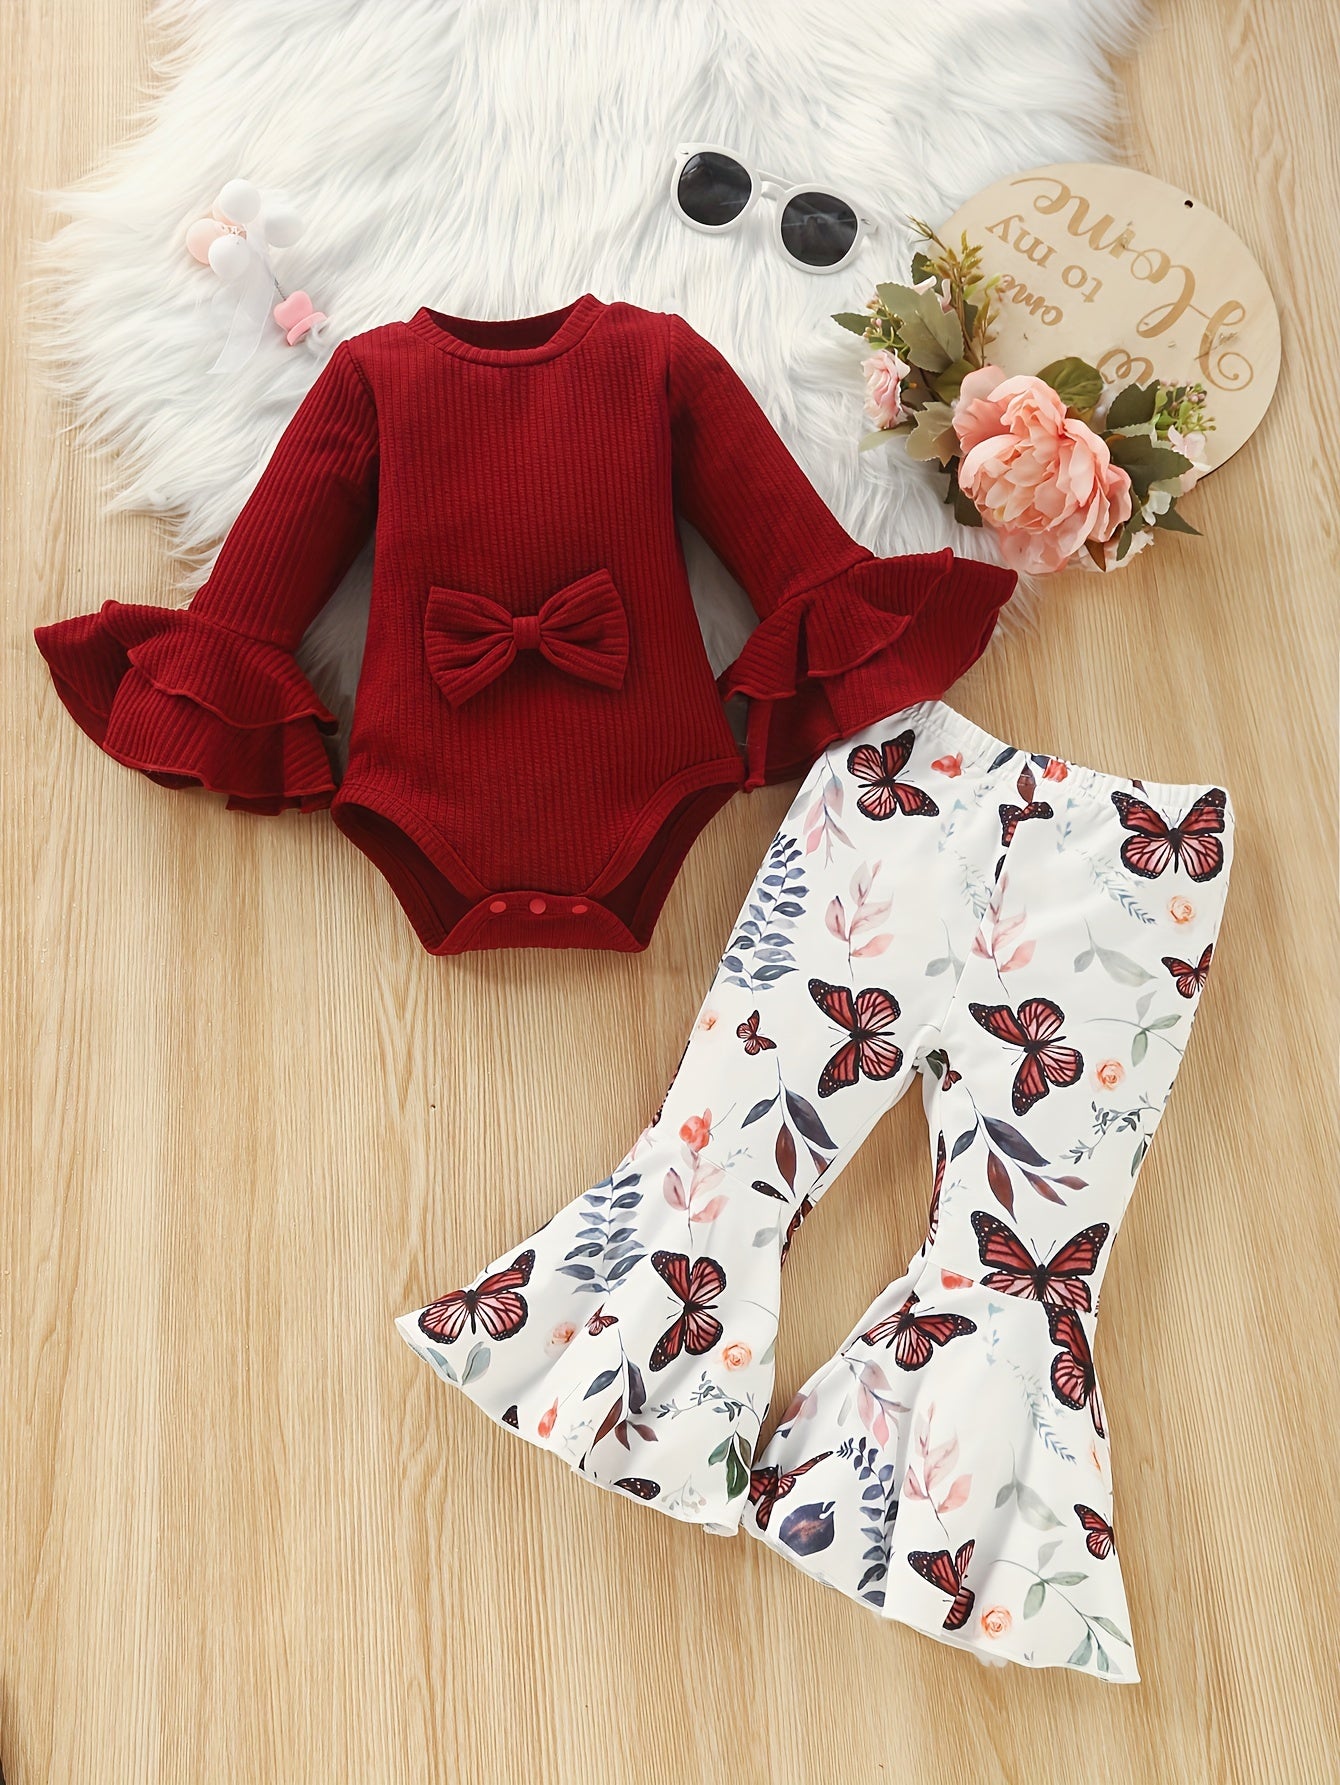 Baby Girl's Long Flared Sleeve Triangle Romper Top + Floral Print Flared Pants Set, Infant Fall Winter Outfit